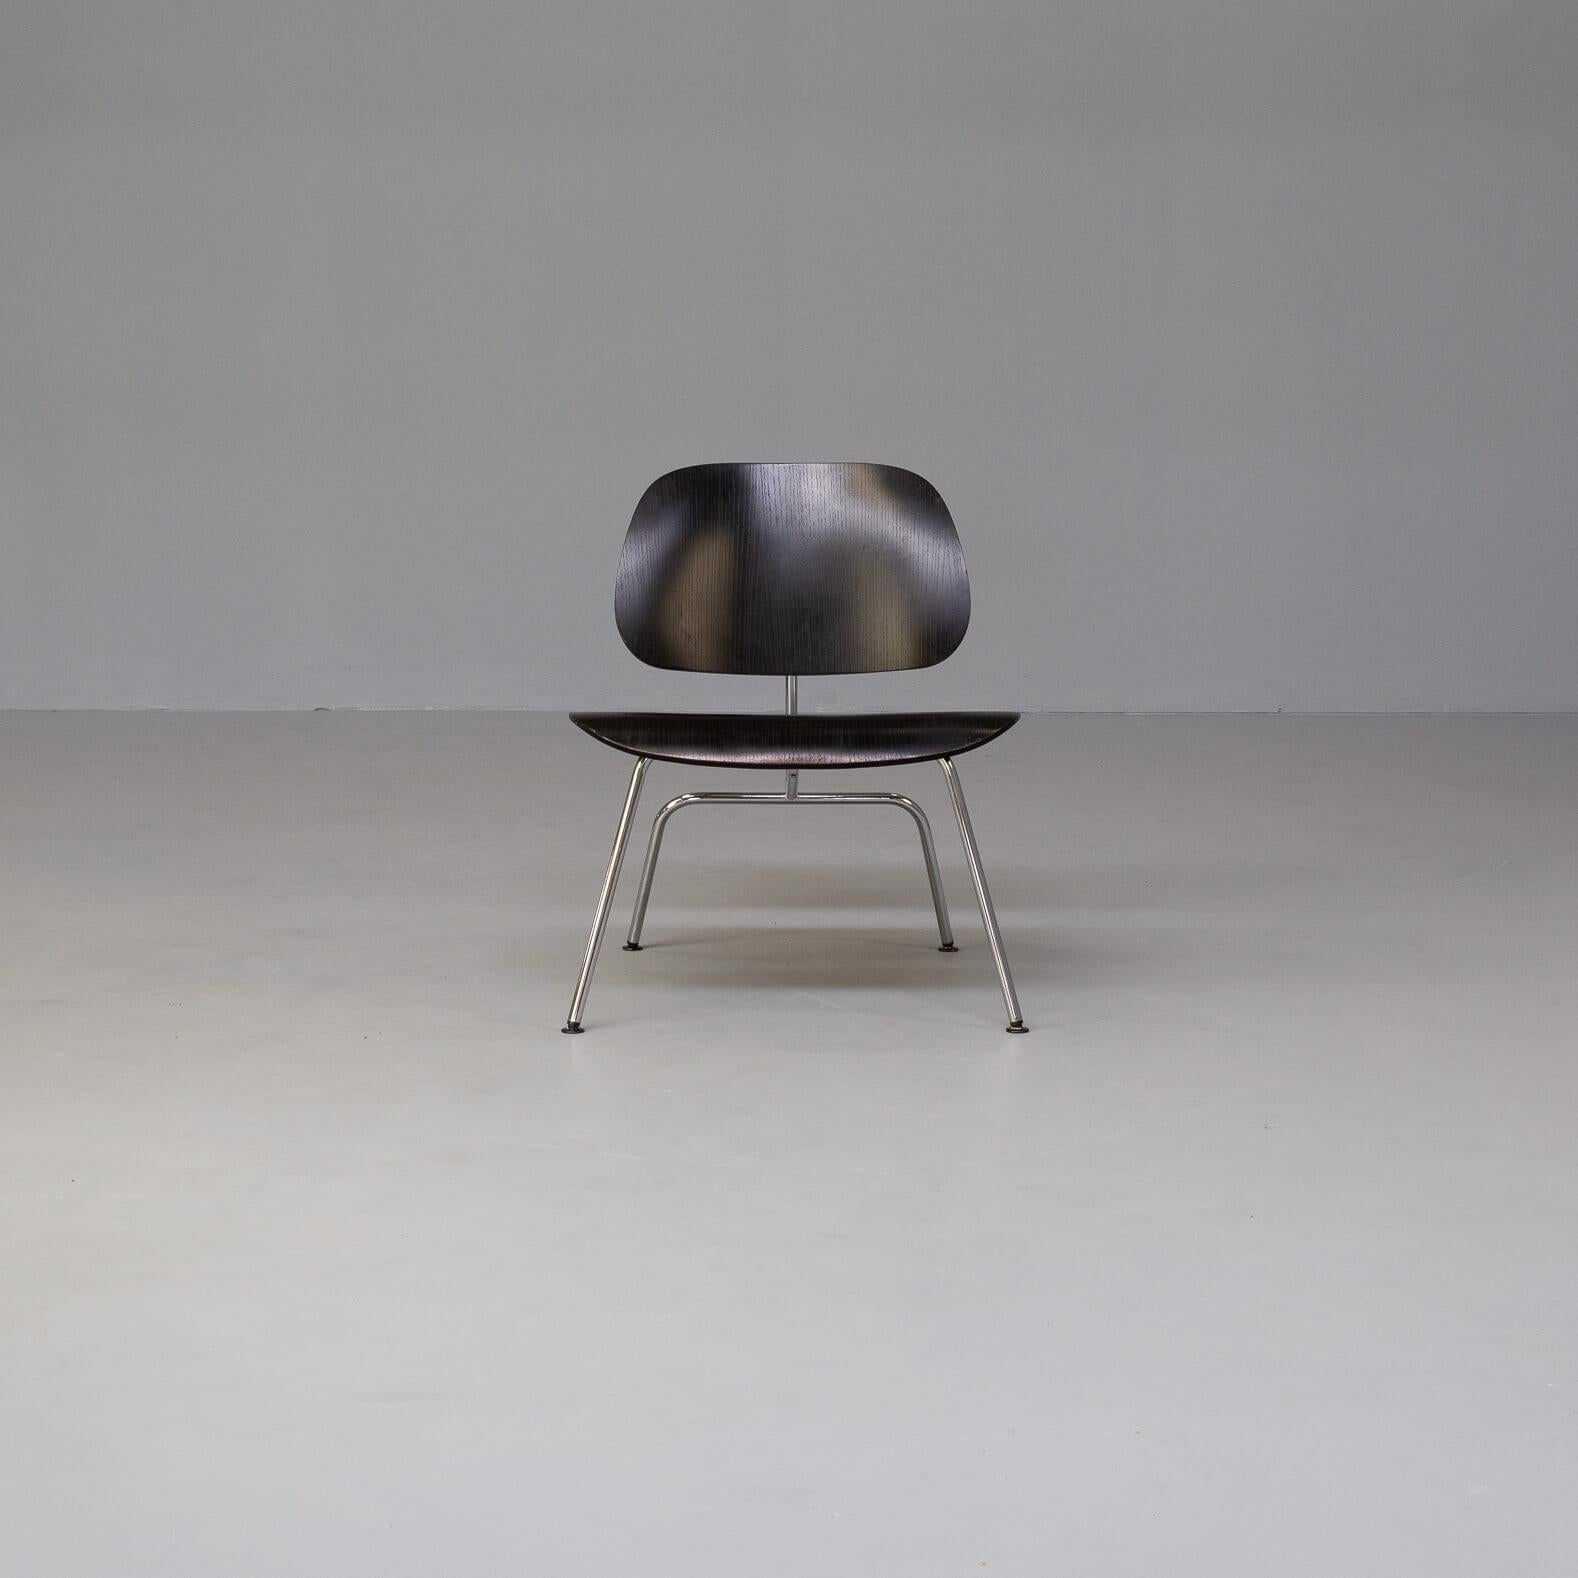 Thanks to the slender organic shapes of the seats and the back shells, Charles and Ray Eames’ LCM quickly acquired the nickname ‘Potato Chip Chair’.
Charles and Ray Eames experimented for years with new techniques to produce three-dimensional